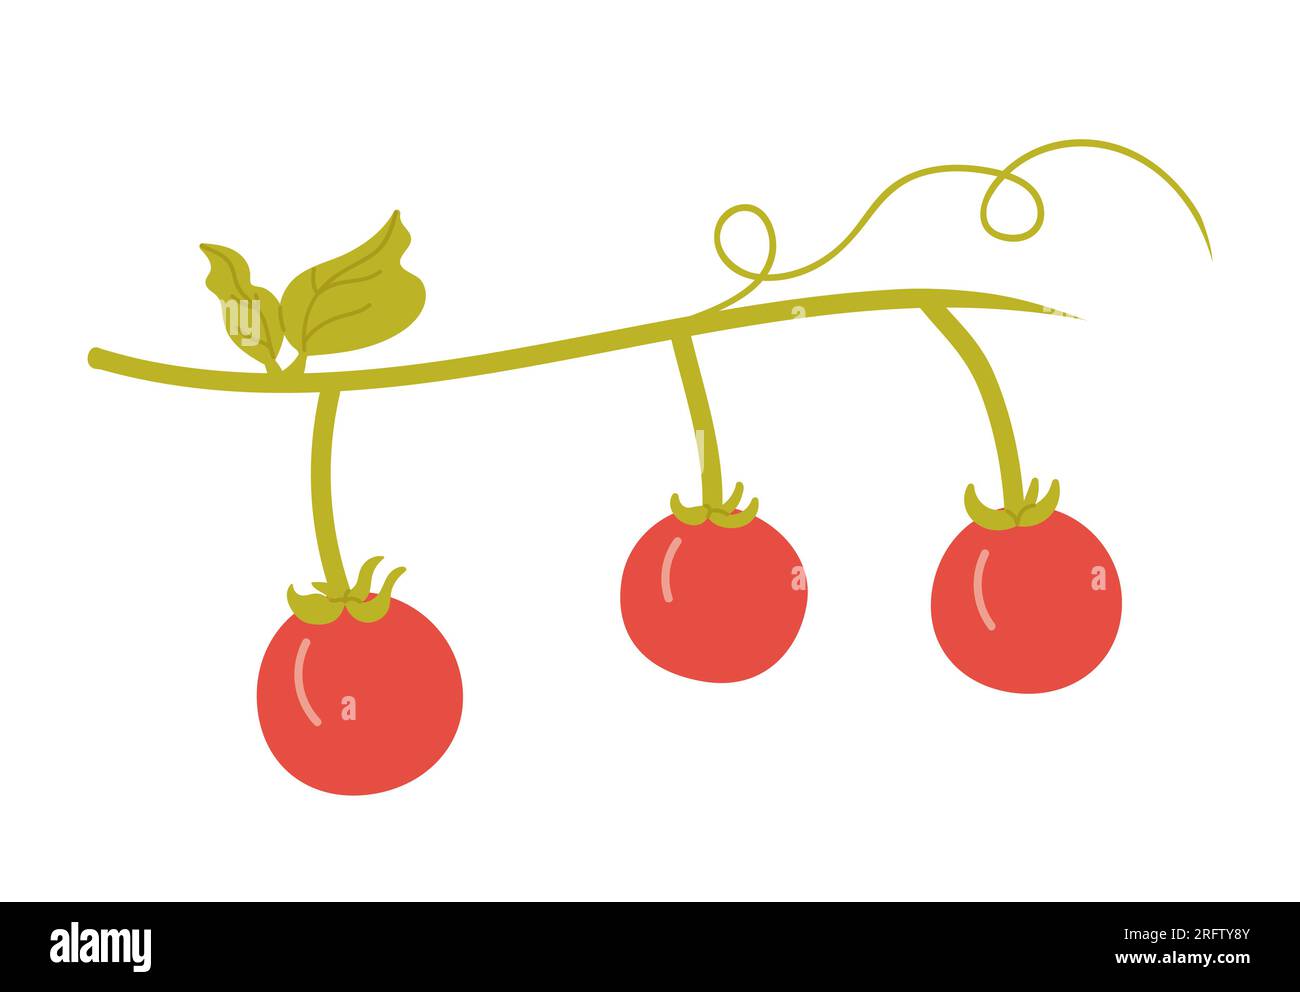 Cherry tomatoes on branch. Healthy vegetables, salad ingredients vector illustration Stock Vector